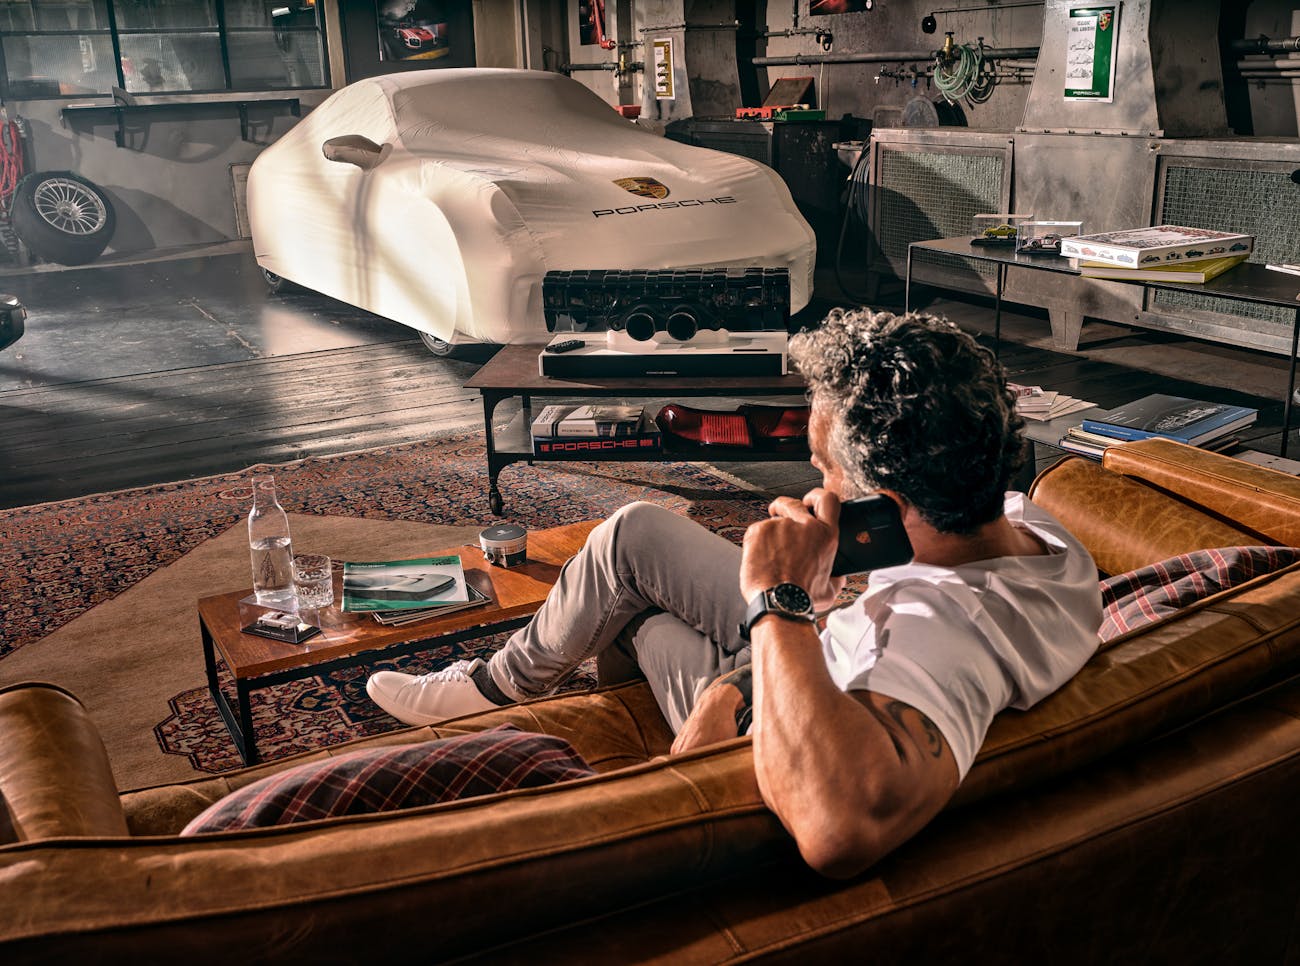 Man lounging on suede sofa in hip garage with Porsche